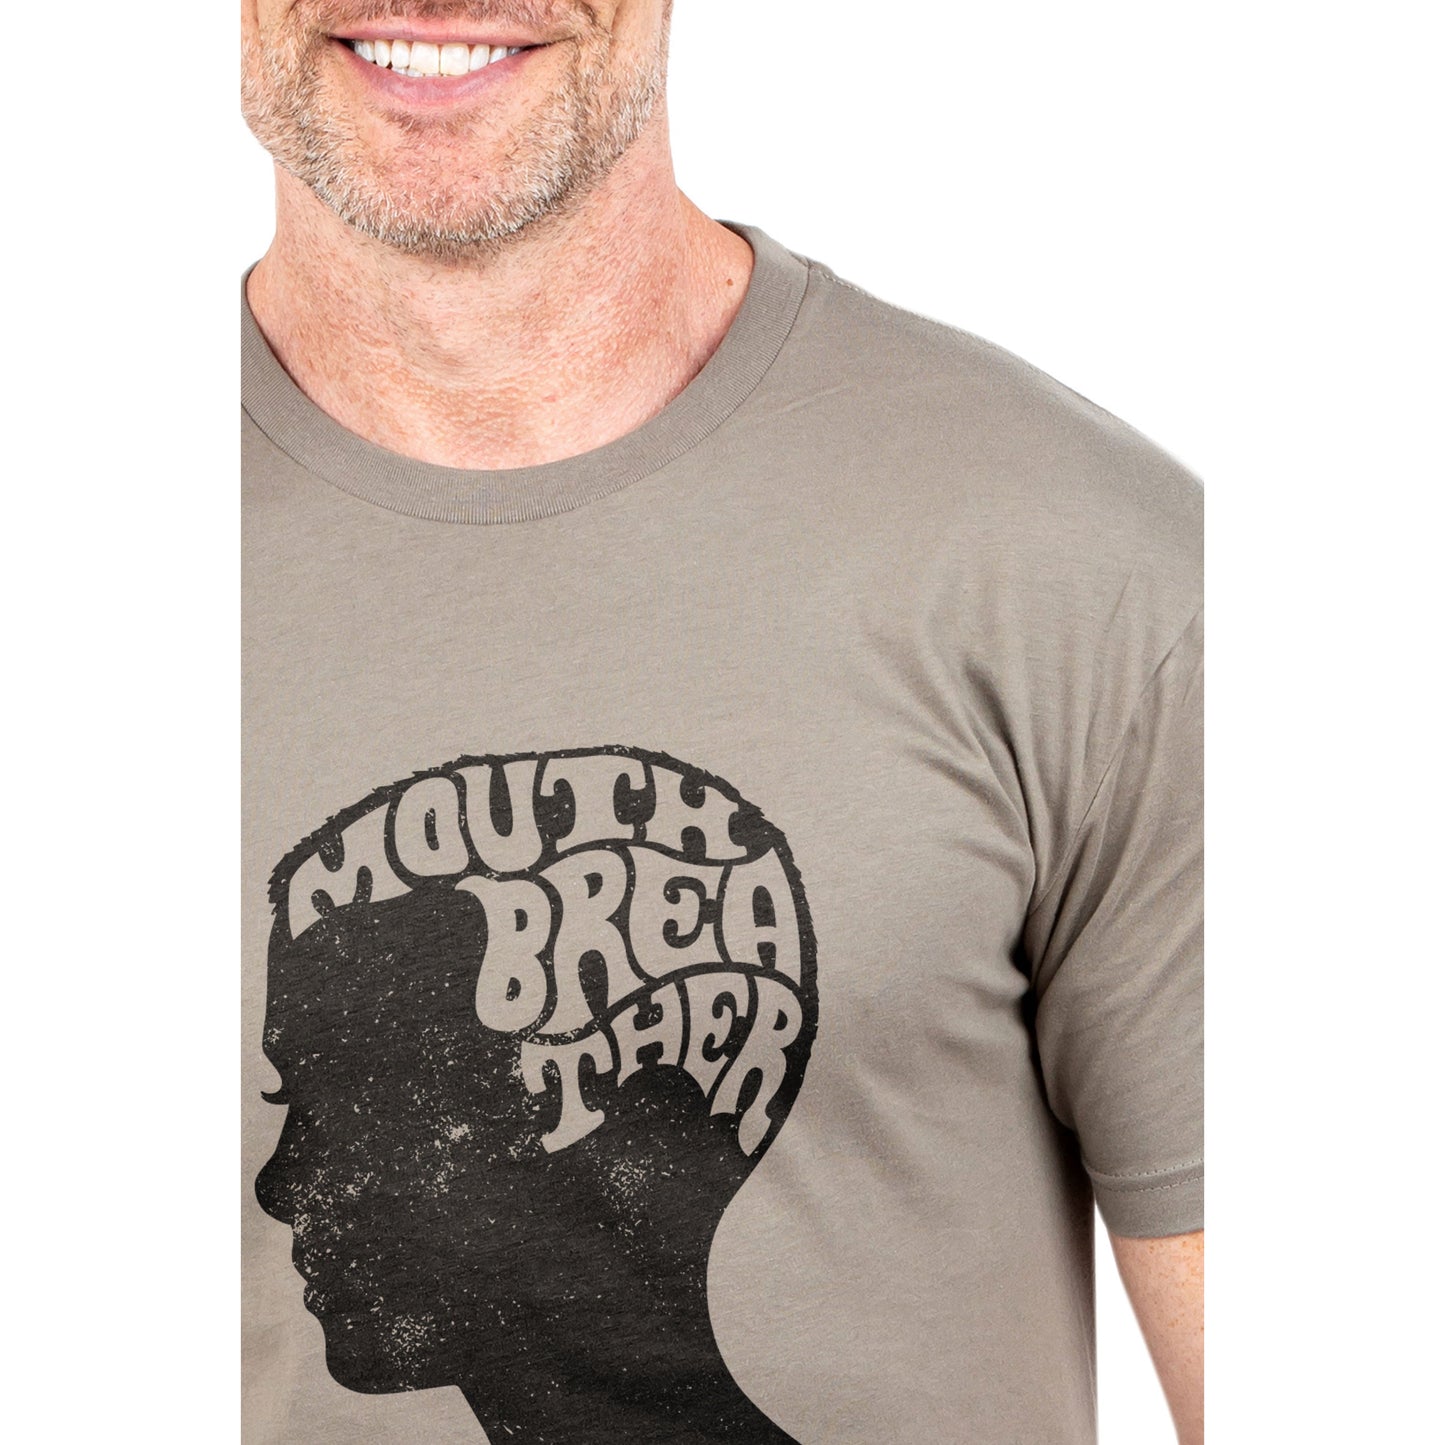 Mouthbreather Printed Graphic Men's Crew T-Shirt Heather Tan Closeup Image